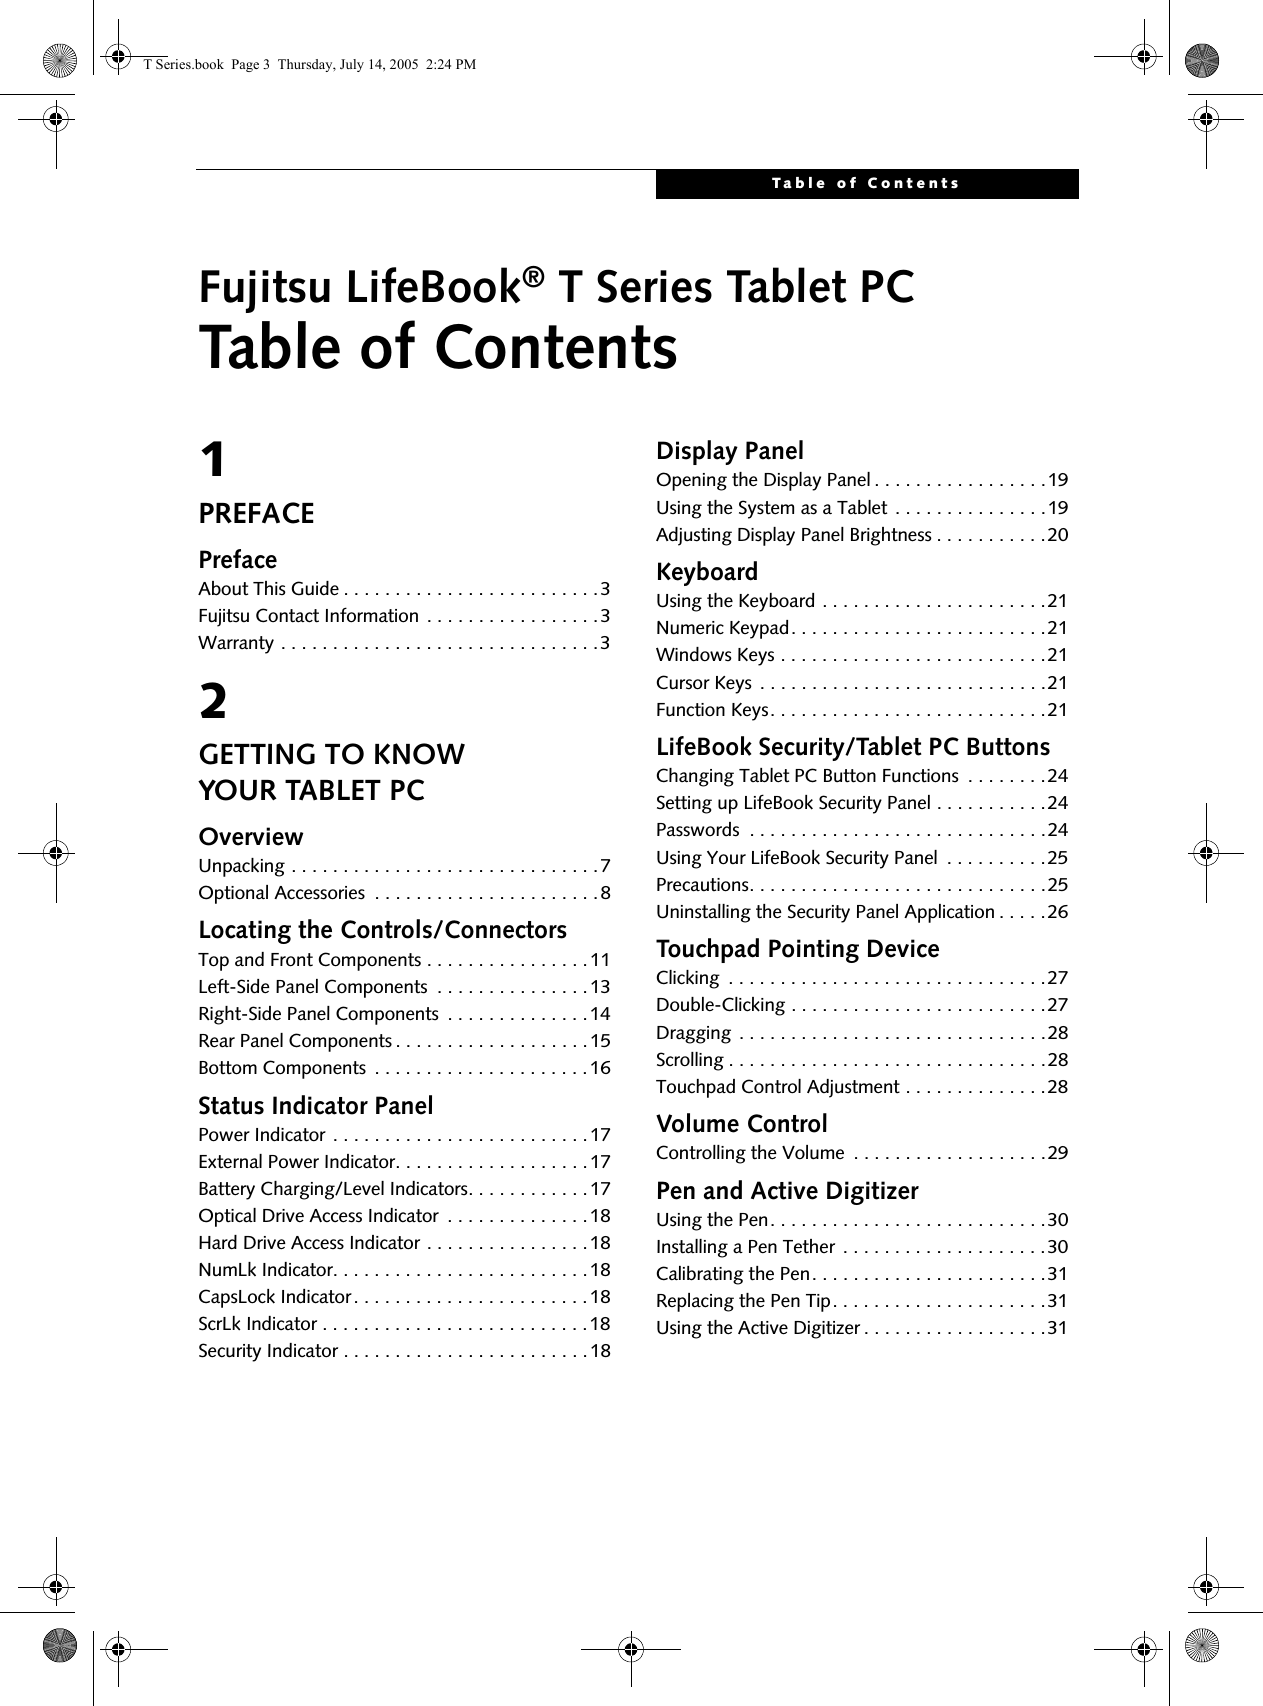 Table of ContentsFujitsu LifeBook® T Series Tablet PCTable of Contents1PREFACEPrefaceAbout This Guide . . . . . . . . . . . . . . . . . . . . . . . . .3Fujitsu Contact Information . . . . . . . . . . . . . . . . .3Warranty . . . . . . . . . . . . . . . . . . . . . . . . . . . . . . .32GETTING TO KNOWYOUR TABLET PCOverviewUnpacking . . . . . . . . . . . . . . . . . . . . . . . . . . . . . .7Optional Accessories  . . . . . . . . . . . . . . . . . . . . . .8Locating the Controls/ConnectorsTop and Front Components . . . . . . . . . . . . . . . .11Left-Side Panel Components  . . . . . . . . . . . . . . .13Right-Side Panel Components  . . . . . . . . . . . . . .14Rear Panel Components . . . . . . . . . . . . . . . . . . .15Bottom Components  . . . . . . . . . . . . . . . . . . . . .16Status Indicator PanelPower Indicator . . . . . . . . . . . . . . . . . . . . . . . . .17External Power Indicator. . . . . . . . . . . . . . . . . . .17Battery Charging/Level Indicators. . . . . . . . . . . .17Optical Drive Access Indicator  . . . . . . . . . . . . . .18Hard Drive Access Indicator . . . . . . . . . . . . . . . .18NumLk Indicator. . . . . . . . . . . . . . . . . . . . . . . . .18CapsLock Indicator. . . . . . . . . . . . . . . . . . . . . . .18ScrLk Indicator . . . . . . . . . . . . . . . . . . . . . . . . . .18Security Indicator . . . . . . . . . . . . . . . . . . . . . . . .18Display PanelOpening the Display Panel . . . . . . . . . . . . . . . . .19Using the System as a Tablet . . . . . . . . . . . . . . .19Adjusting Display Panel Brightness . . . . . . . . . . .20KeyboardUsing the Keyboard . . . . . . . . . . . . . . . . . . . . . .21Numeric Keypad. . . . . . . . . . . . . . . . . . . . . . . . .21Windows Keys . . . . . . . . . . . . . . . . . . . . . . . . . .21Cursor Keys  . . . . . . . . . . . . . . . . . . . . . . . . . . . .21Function Keys. . . . . . . . . . . . . . . . . . . . . . . . . . .21LifeBook Security/Tablet PC ButtonsChanging Tablet PC Button Functions  . . . . . . . .24Setting up LifeBook Security Panel . . . . . . . . . . .24Passwords  . . . . . . . . . . . . . . . . . . . . . . . . . . . . .24Using Your LifeBook Security Panel  . . . . . . . . . .25Precautions. . . . . . . . . . . . . . . . . . . . . . . . . . . . .25Uninstalling the Security Panel Application . . . . .26Touchpad Pointing DeviceClicking  . . . . . . . . . . . . . . . . . . . . . . . . . . . . . . .27Double-Clicking . . . . . . . . . . . . . . . . . . . . . . . . .27Dragging  . . . . . . . . . . . . . . . . . . . . . . . . . . . . . .28Scrolling . . . . . . . . . . . . . . . . . . . . . . . . . . . . . . .28Touchpad Control Adjustment . . . . . . . . . . . . . .28Volume ControlControlling the Volume  . . . . . . . . . . . . . . . . . . .29Pen and Active DigitizerUsing the Pen. . . . . . . . . . . . . . . . . . . . . . . . . . .30Installing a Pen Tether  . . . . . . . . . . . . . . . . . . . .30Calibrating the Pen. . . . . . . . . . . . . . . . . . . . . . .31Replacing the Pen Tip. . . . . . . . . . . . . . . . . . . . .31Using the Active Digitizer . . . . . . . . . . . . . . . . . .31T Series.book  Page 3  Thursday, July 14, 2005  2:24 PM